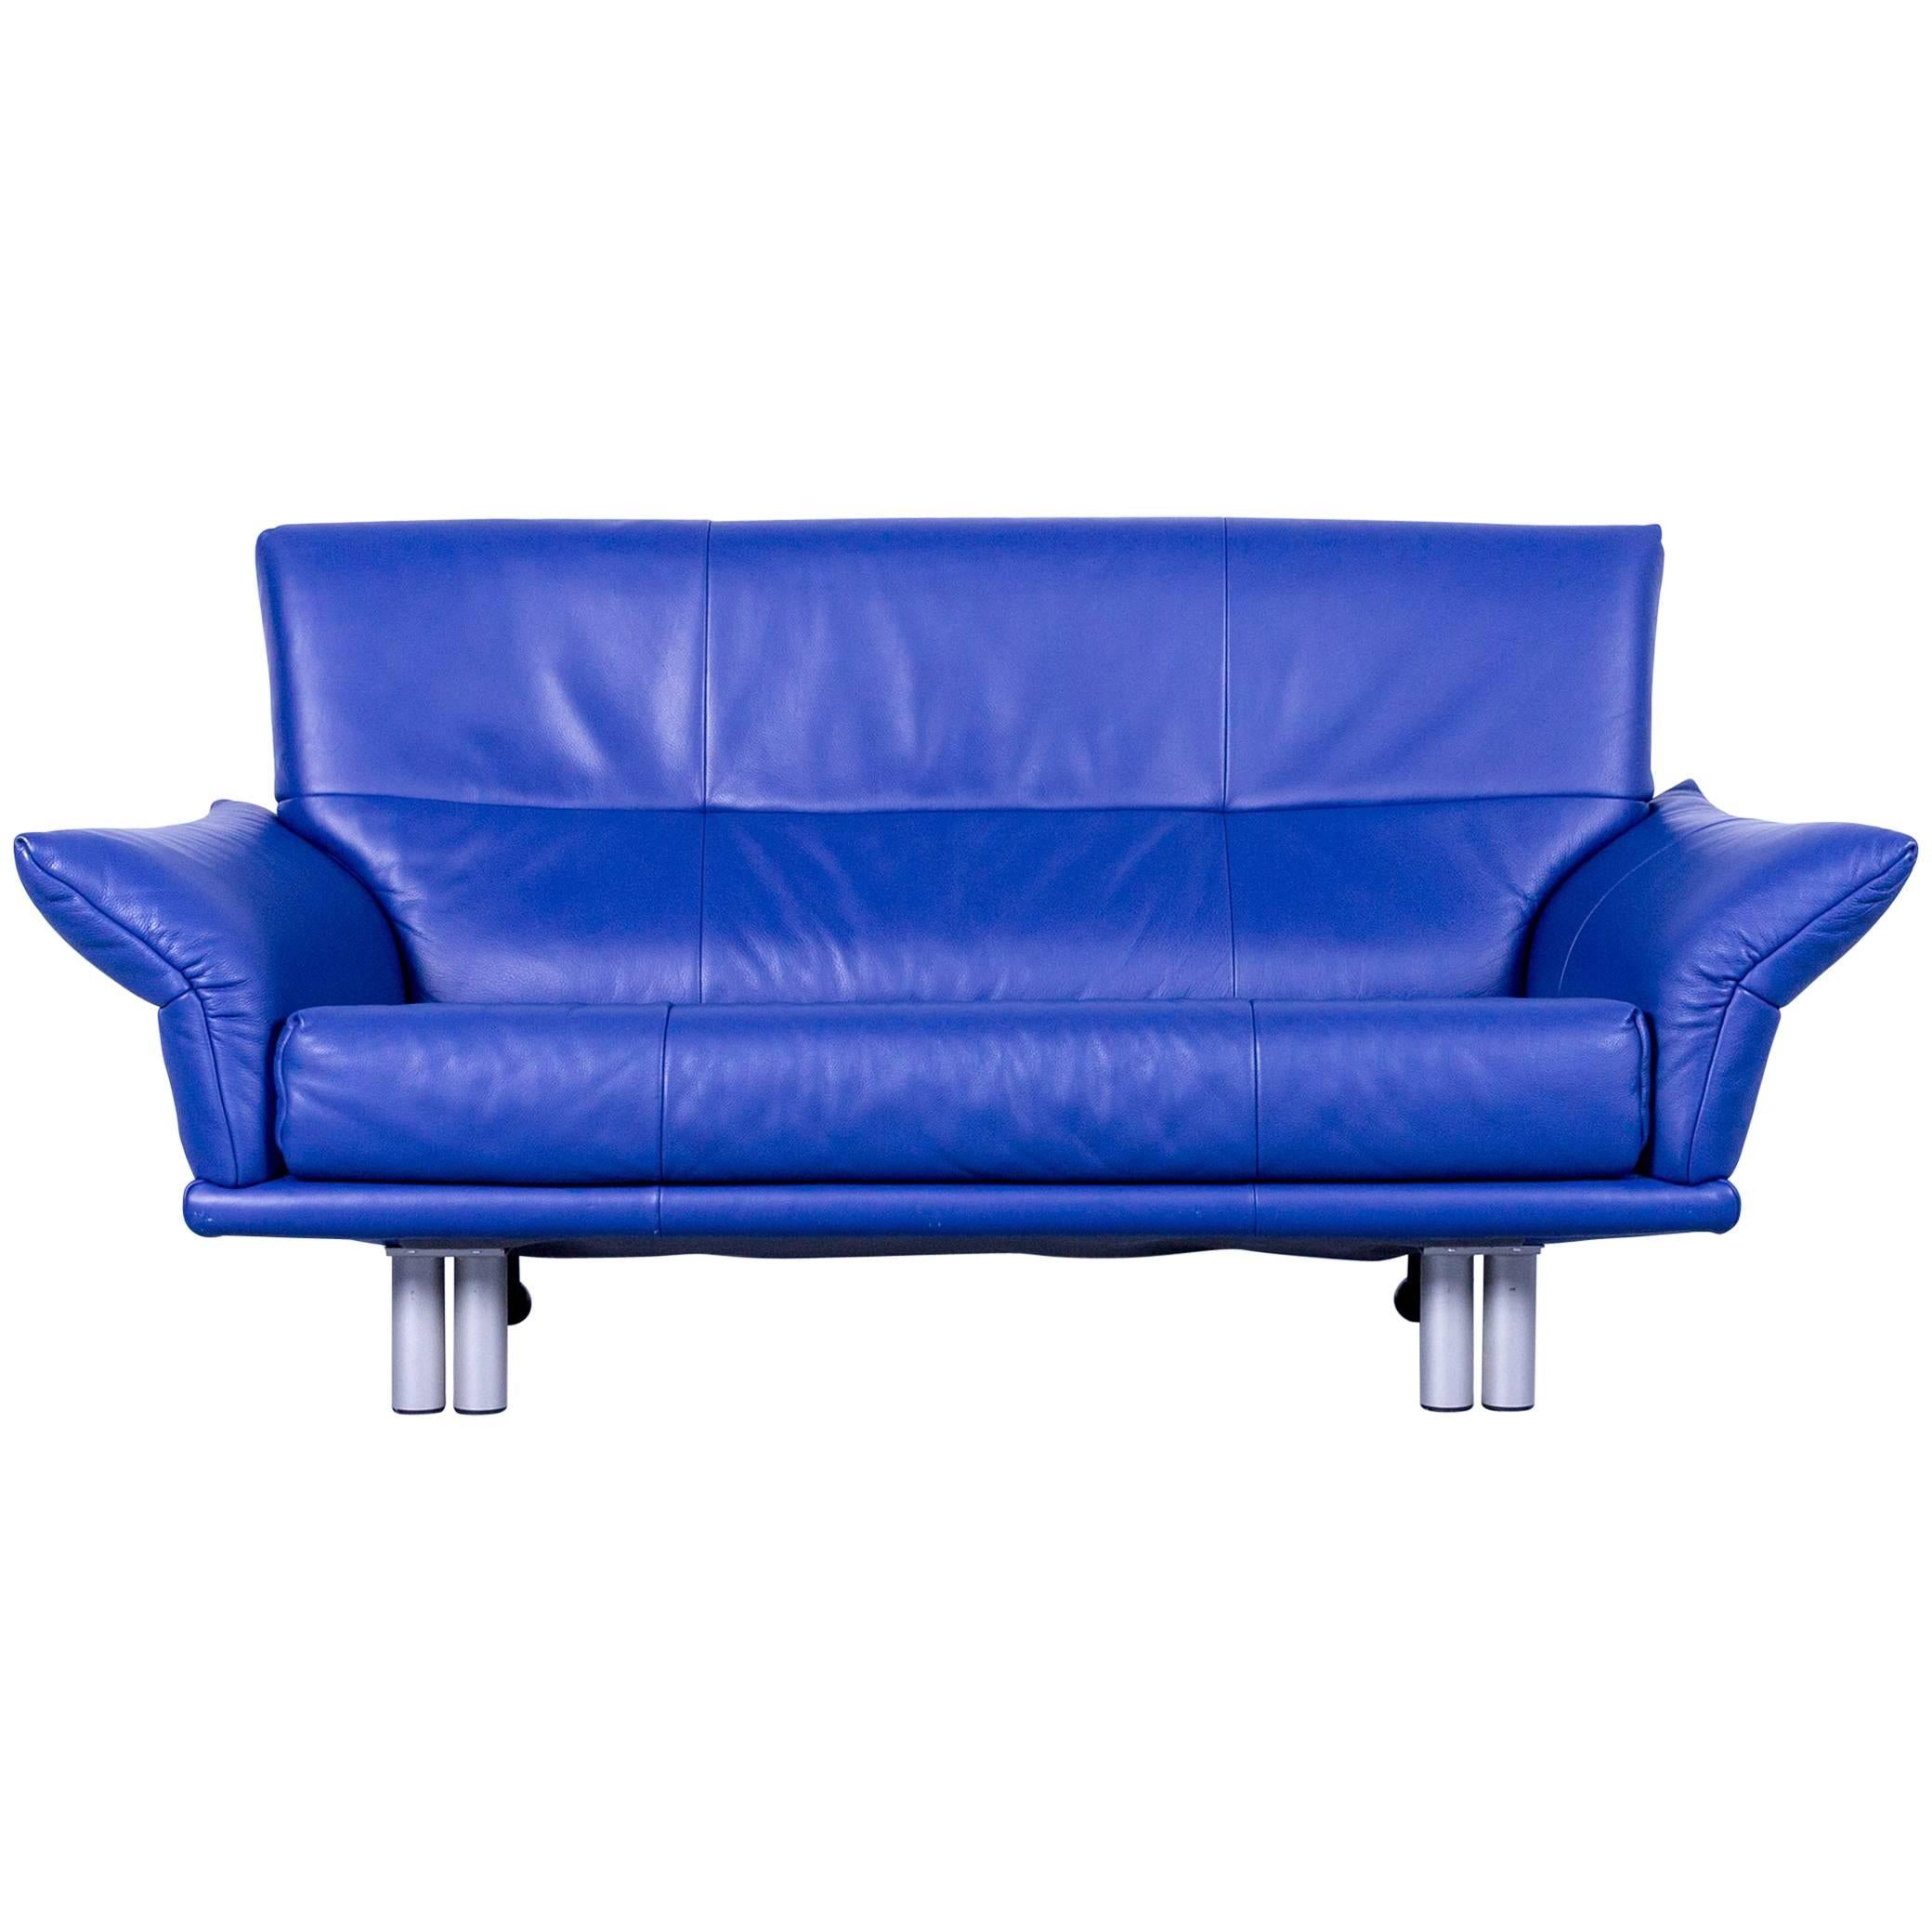 Rolf Benz Bmp Designer Sofa Leather Blue Two-Seat Couch Modern